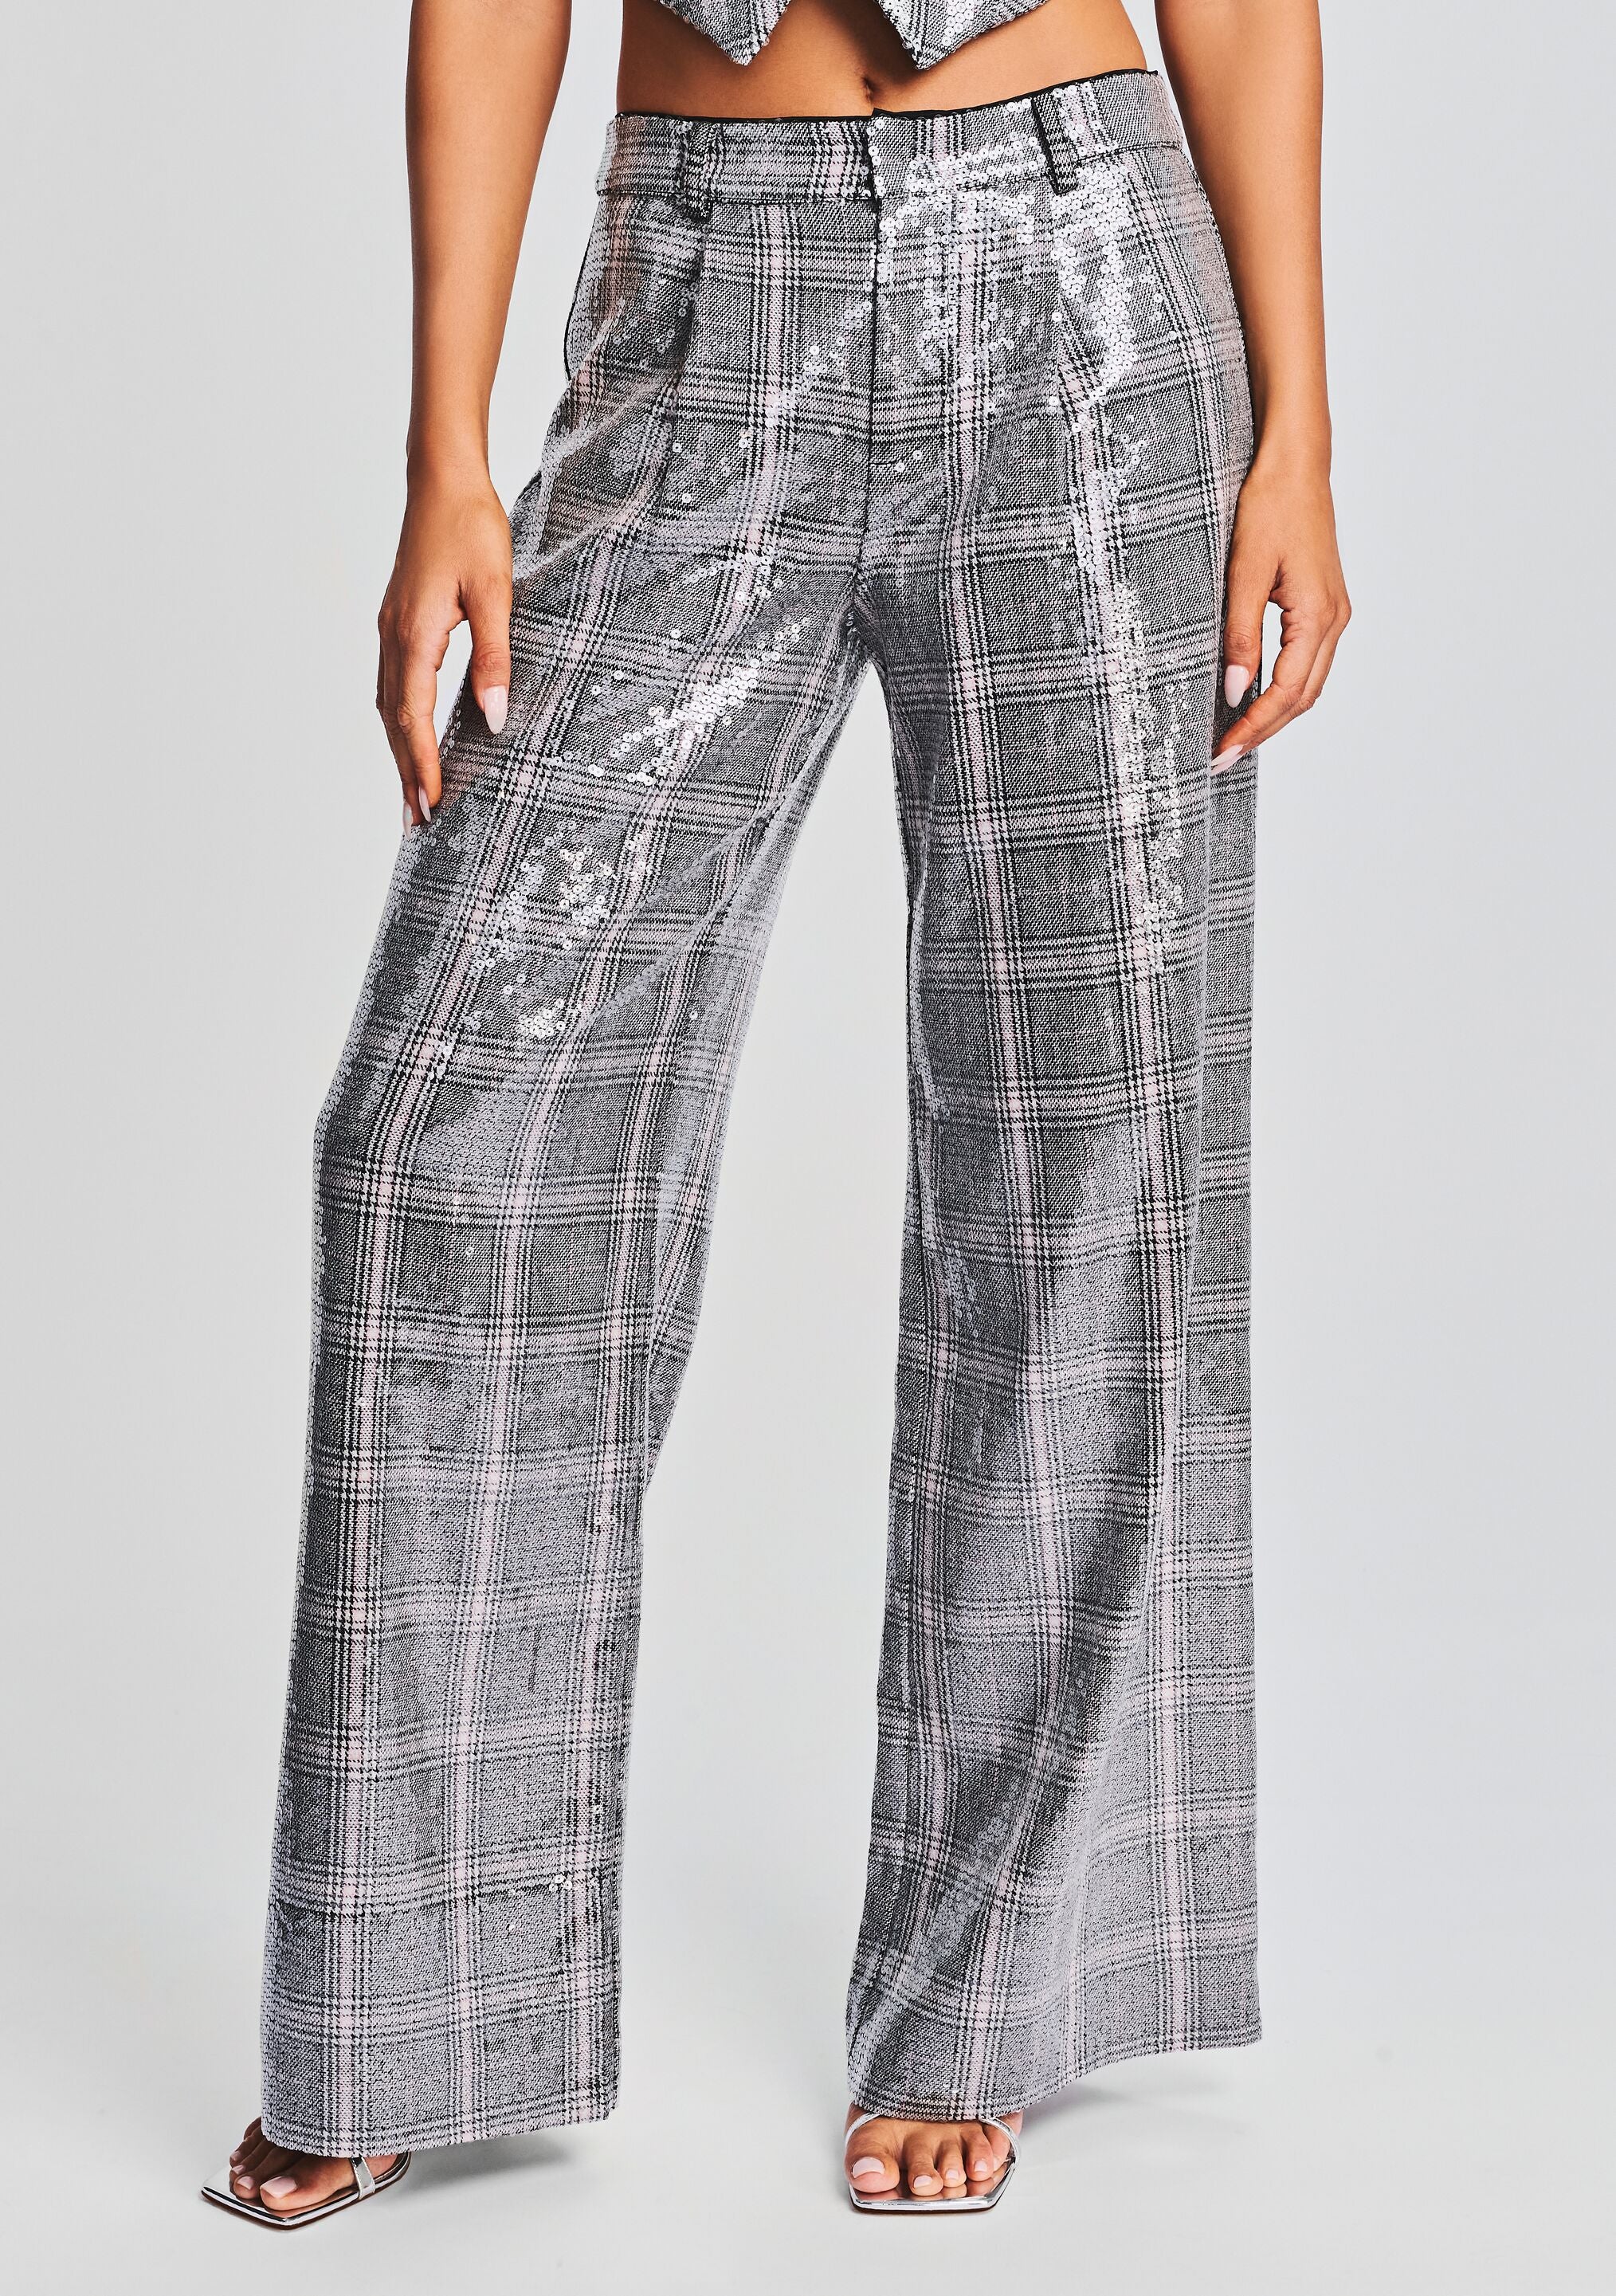 Mesh Sequin Flare Pant in Silver | LAPOINTE